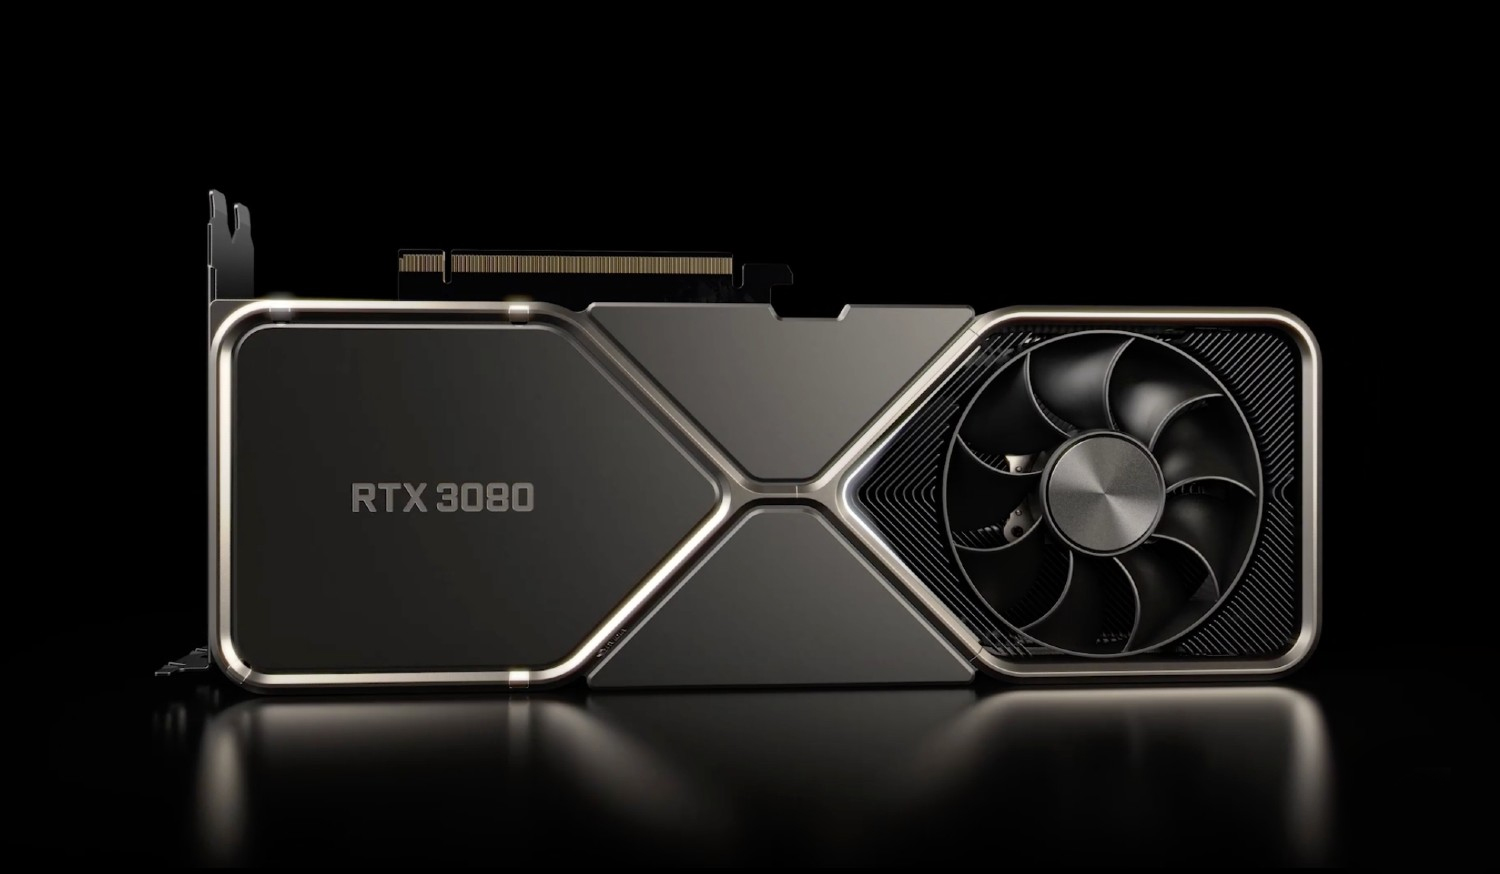 Nvidia quietly cuts price of poorly reviewed 16GB 4060 Ti ahead of AMD  launch